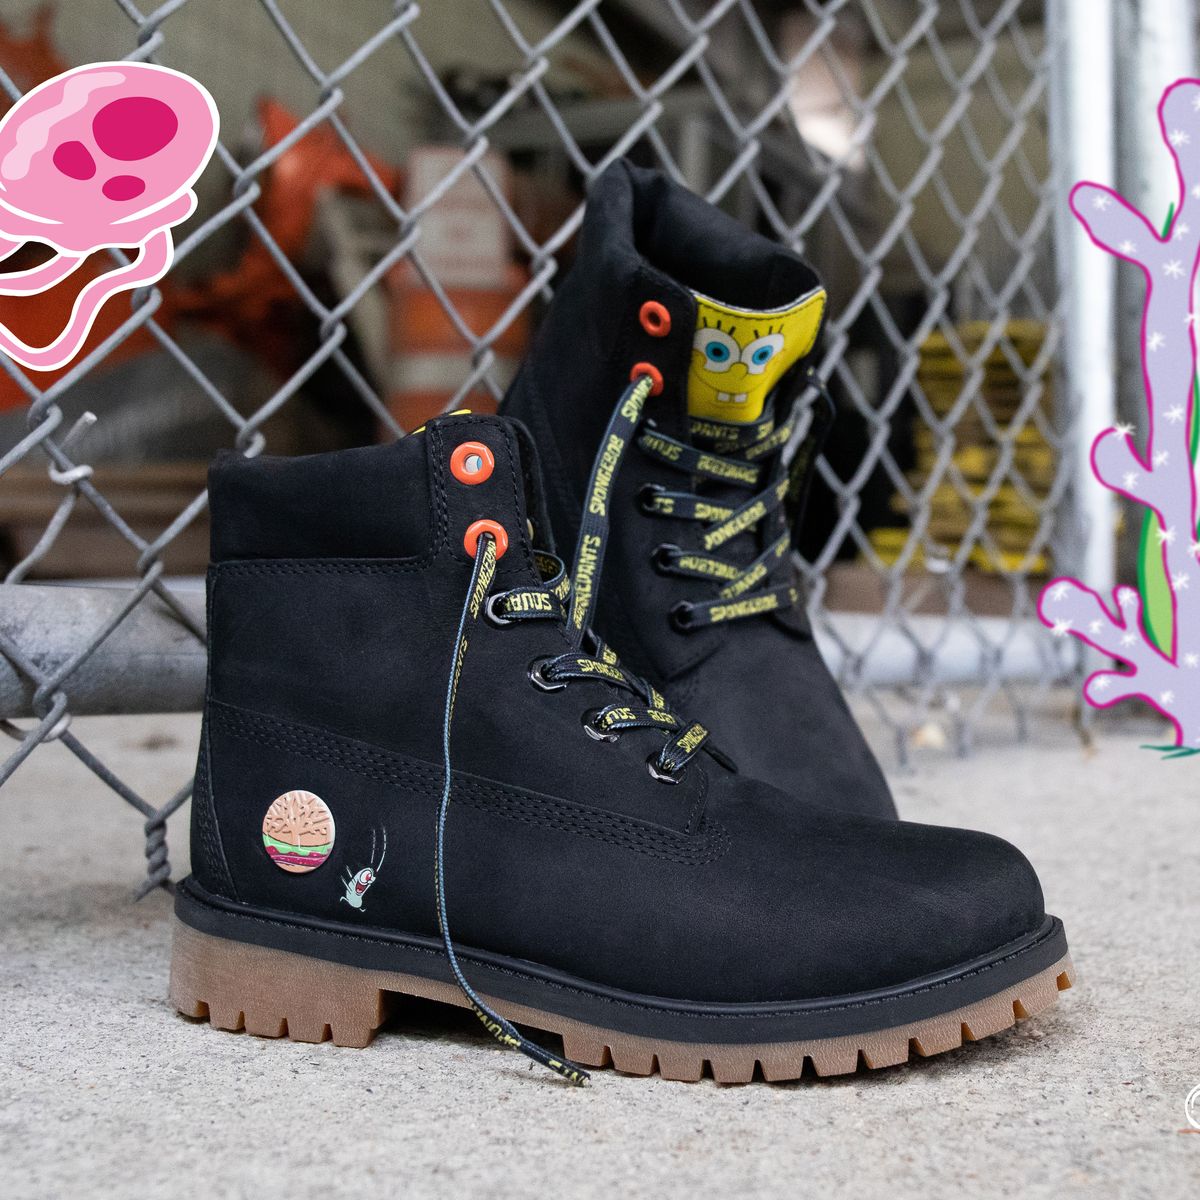 grens supermarkt Toegeven Timberland x SpongeBob SquarePants Boots Price and Where to Buy